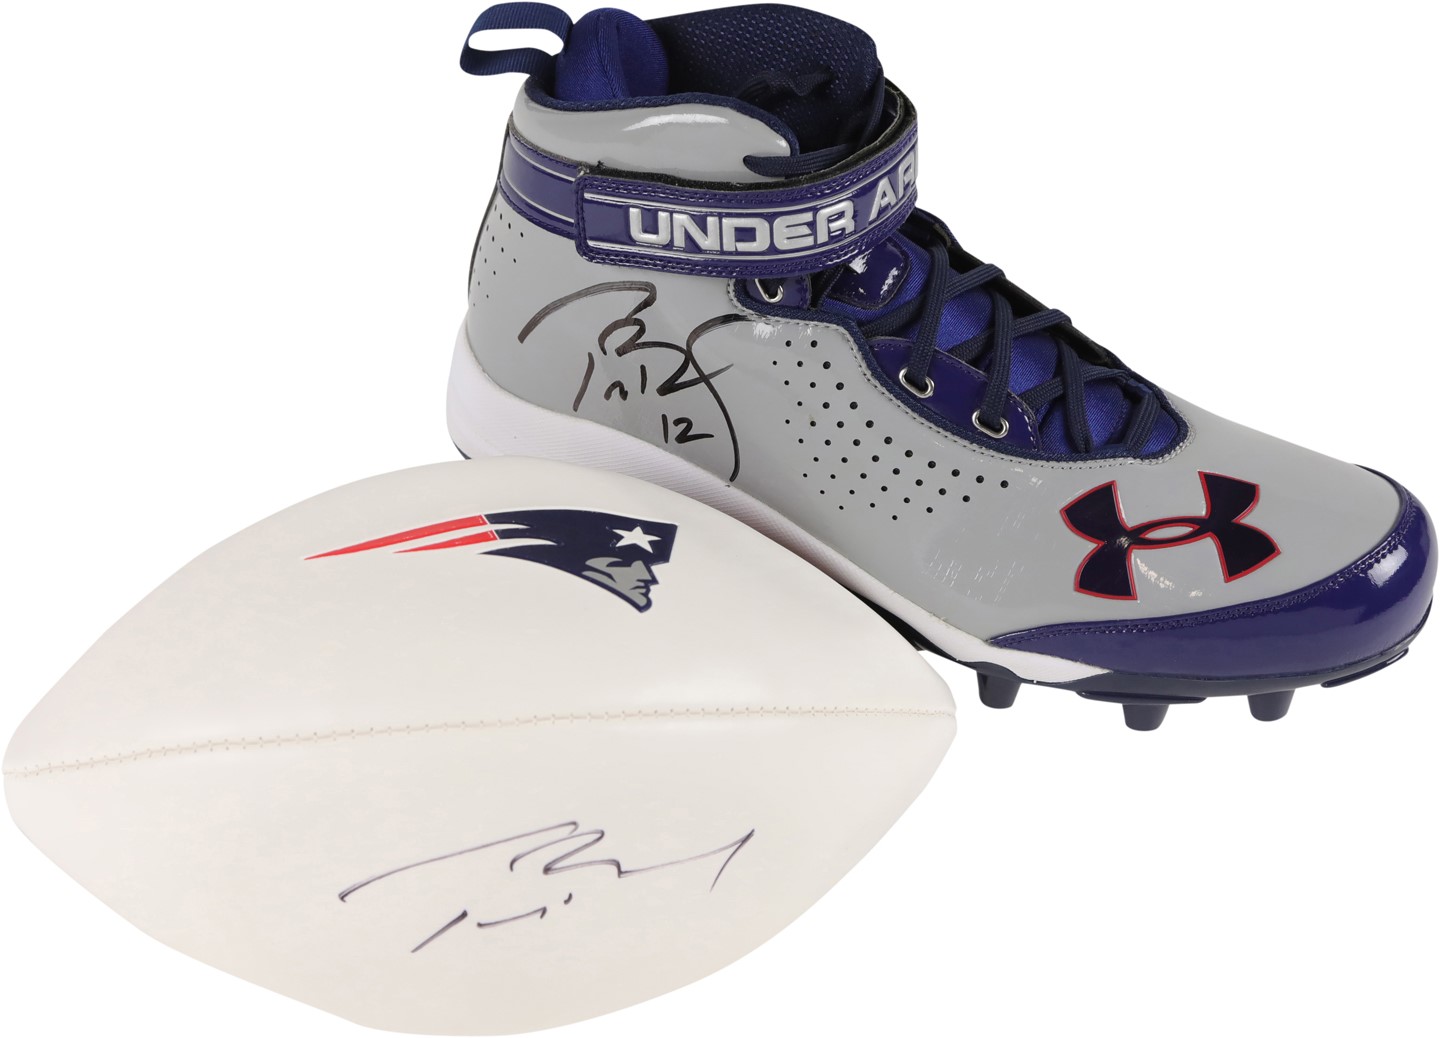 - Tom Brady Signed Football and Under Armour Cleat (PSA)